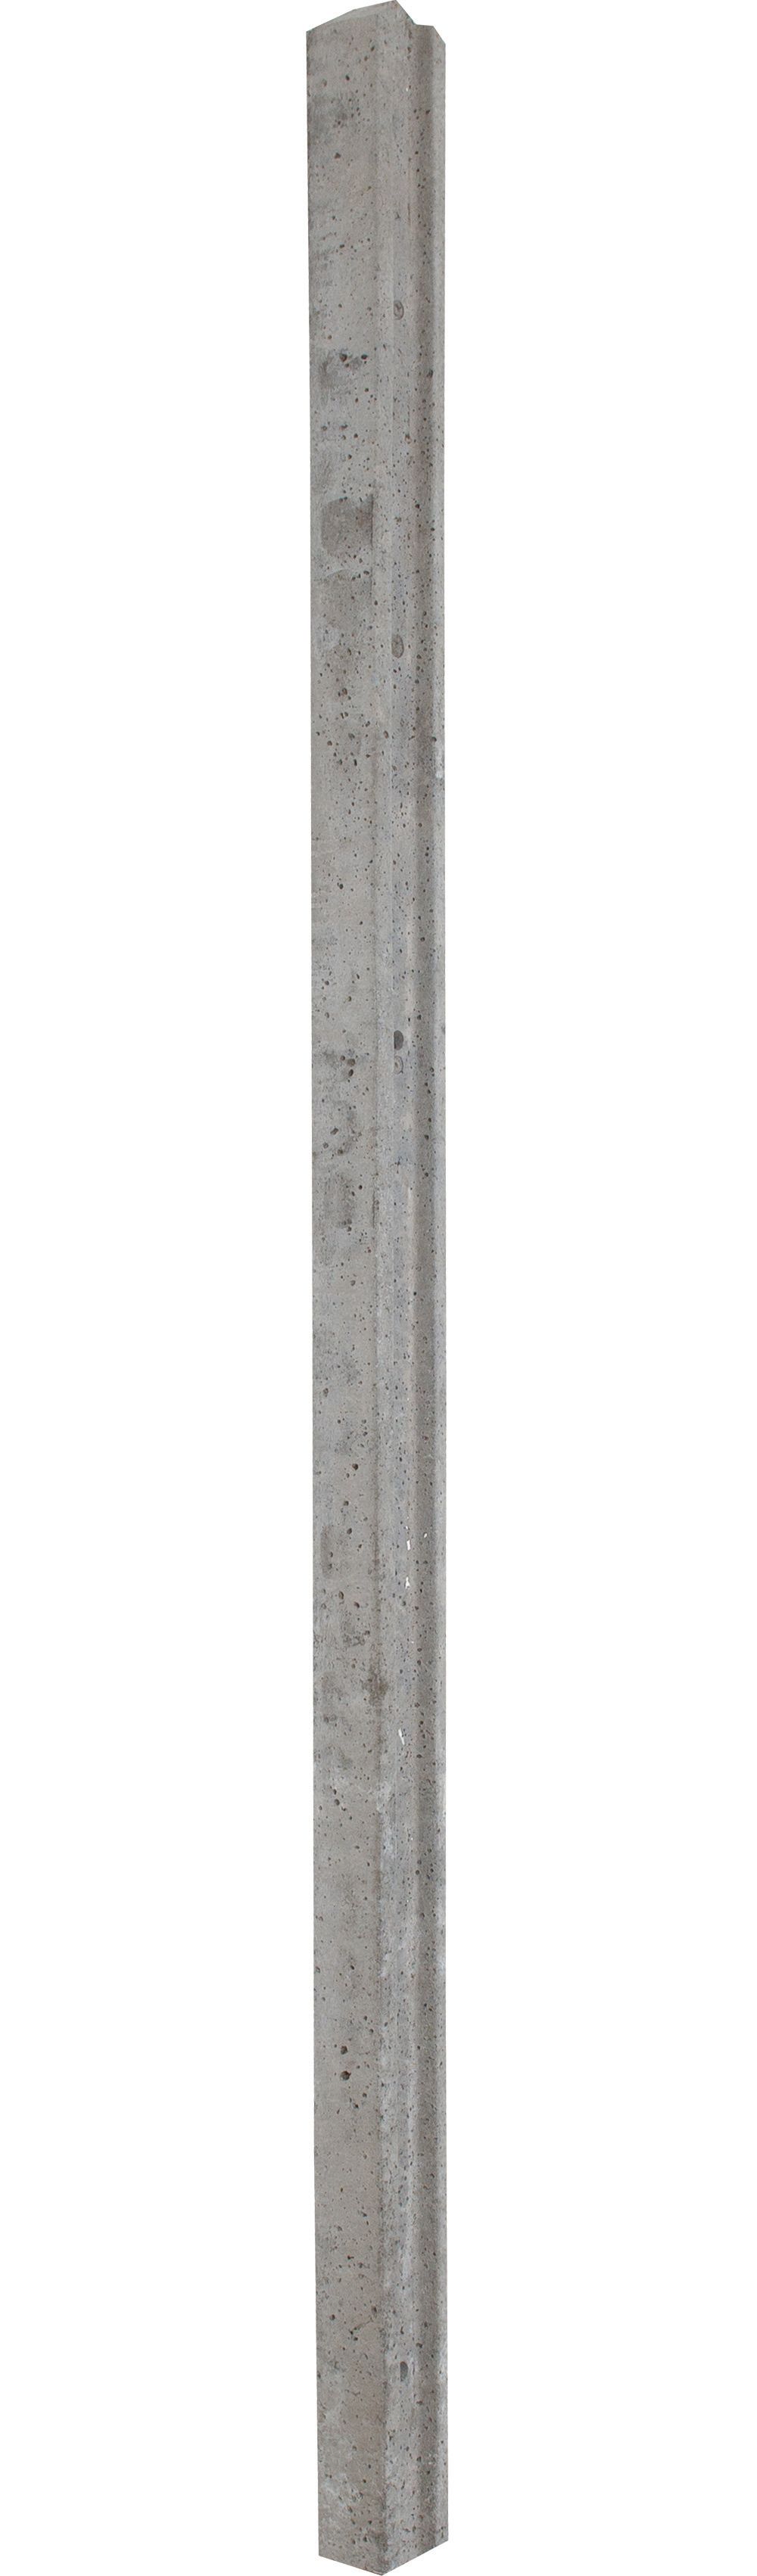 Image of Wickes Slotted Concrete Fence Post 60 x 100mm x 1.8m